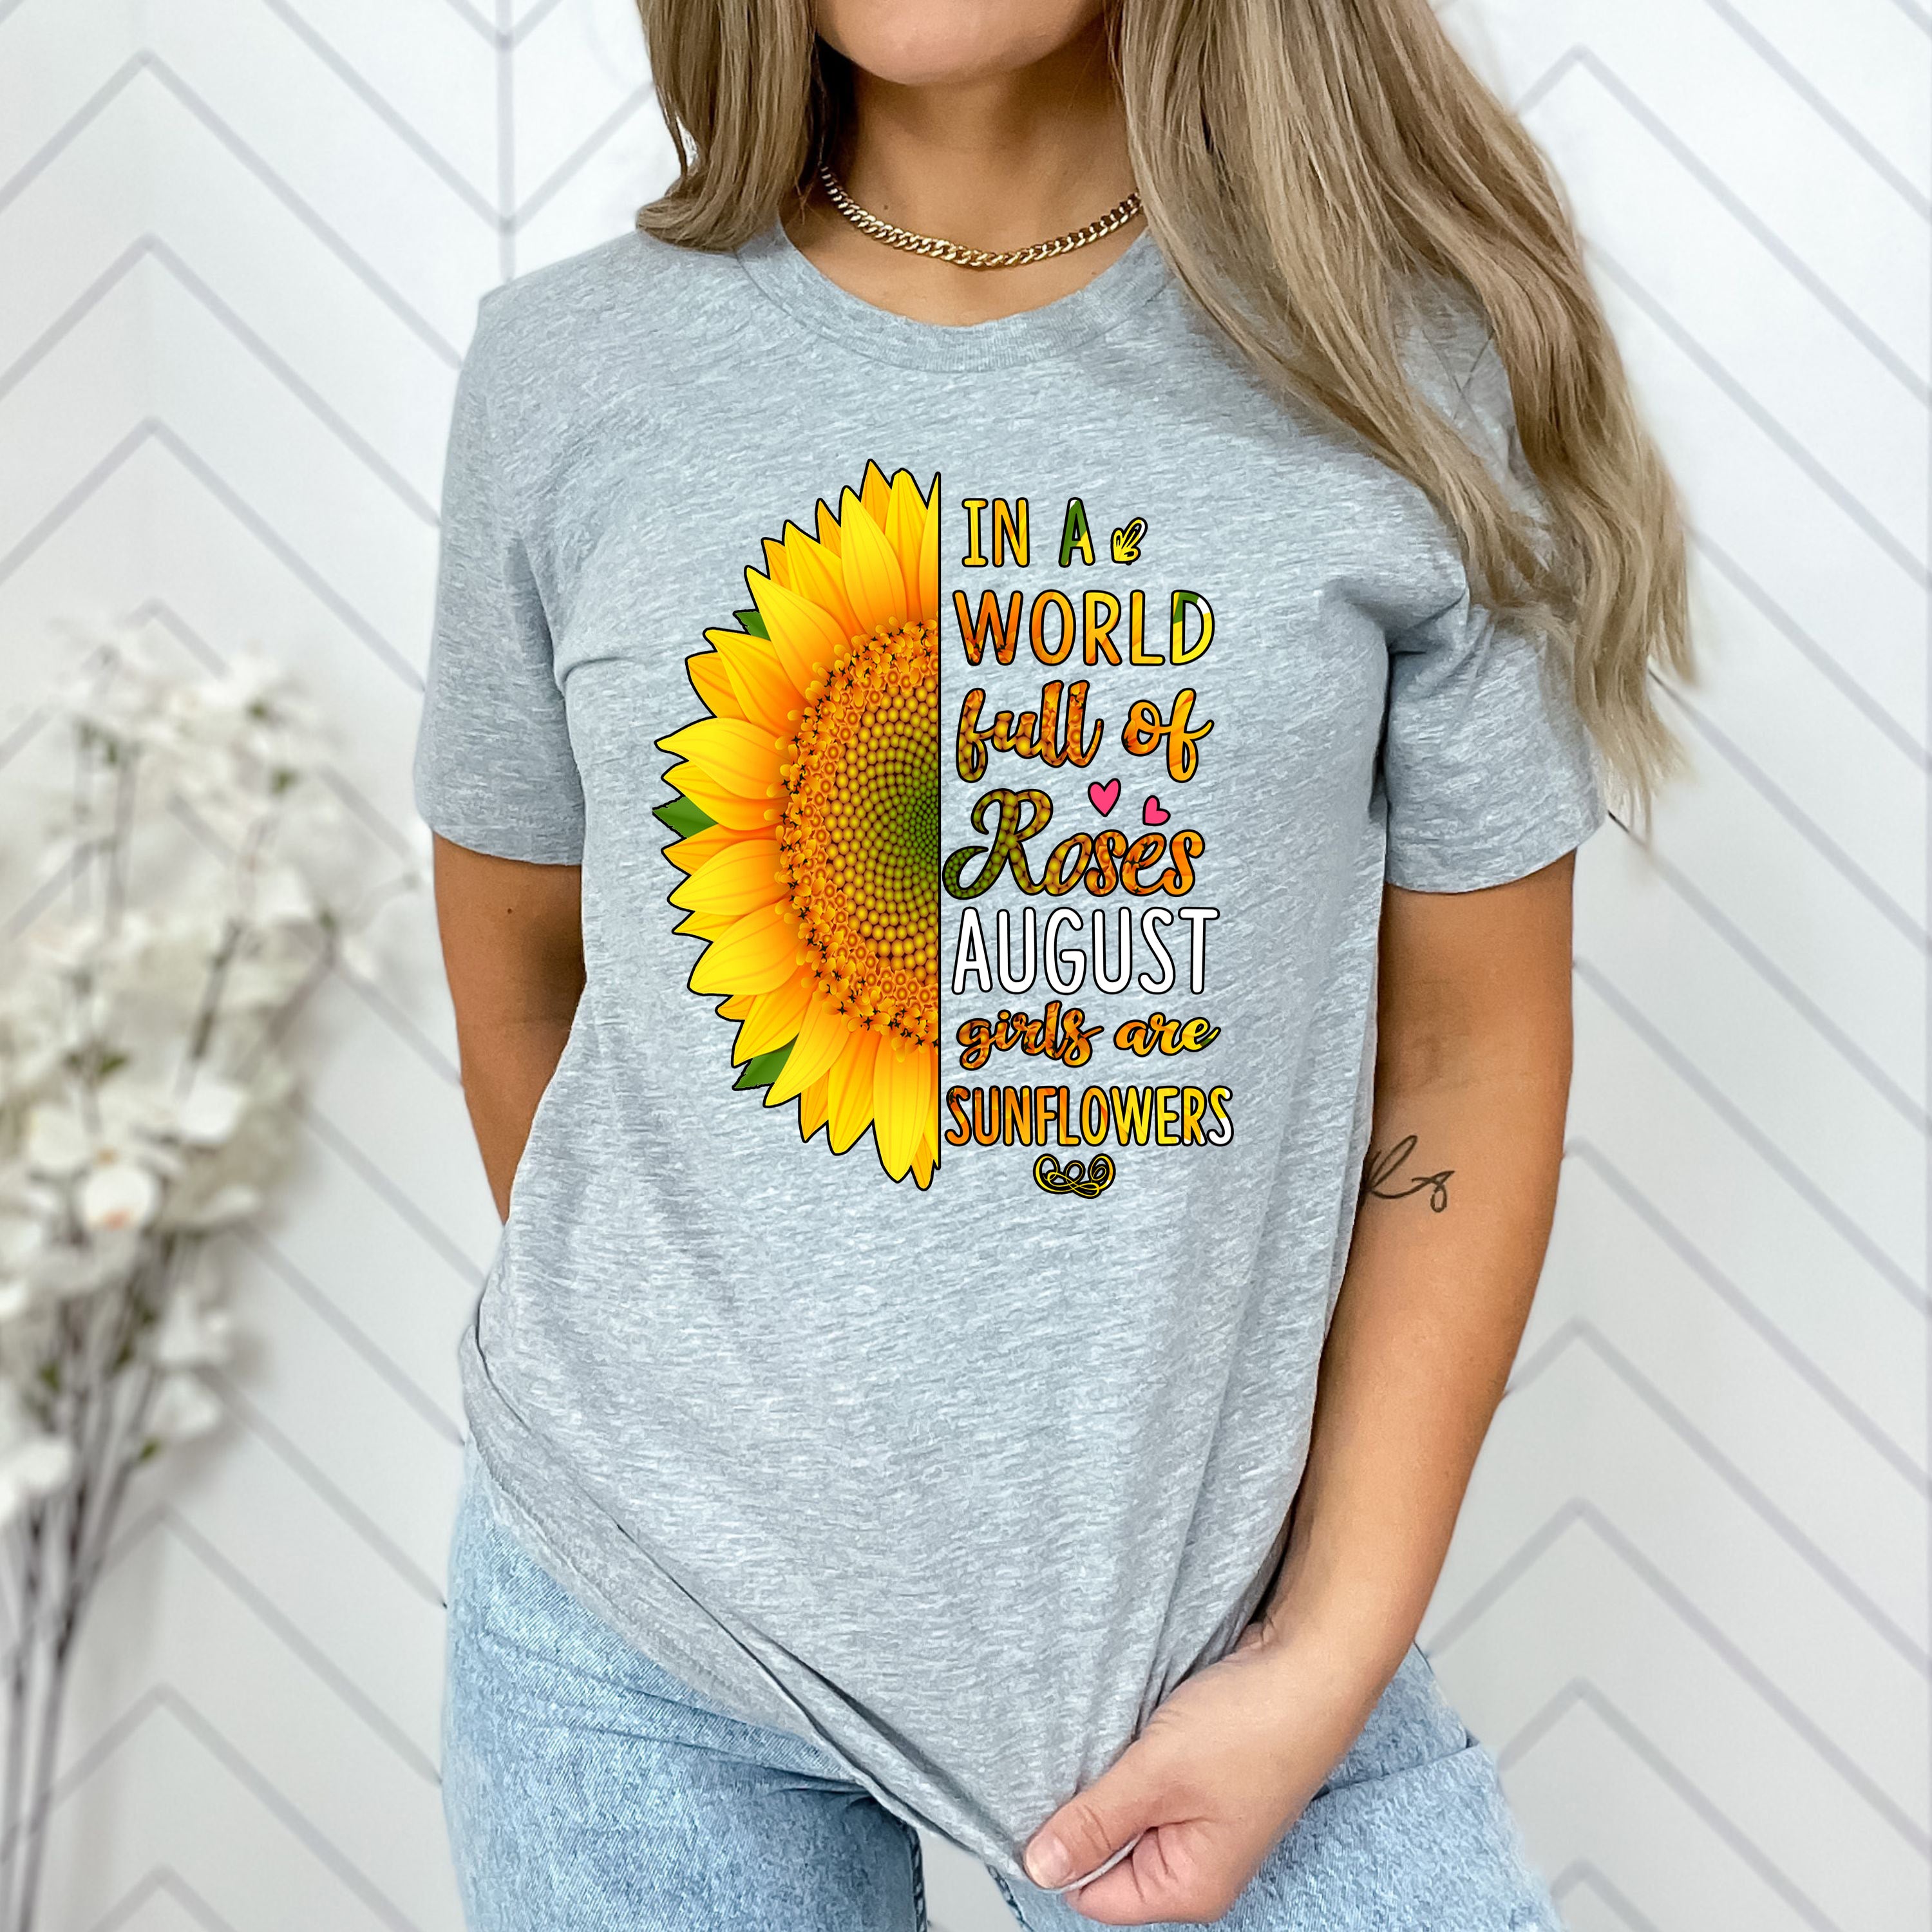 "In A World Full Of Roses August Girls are Sunflowers"